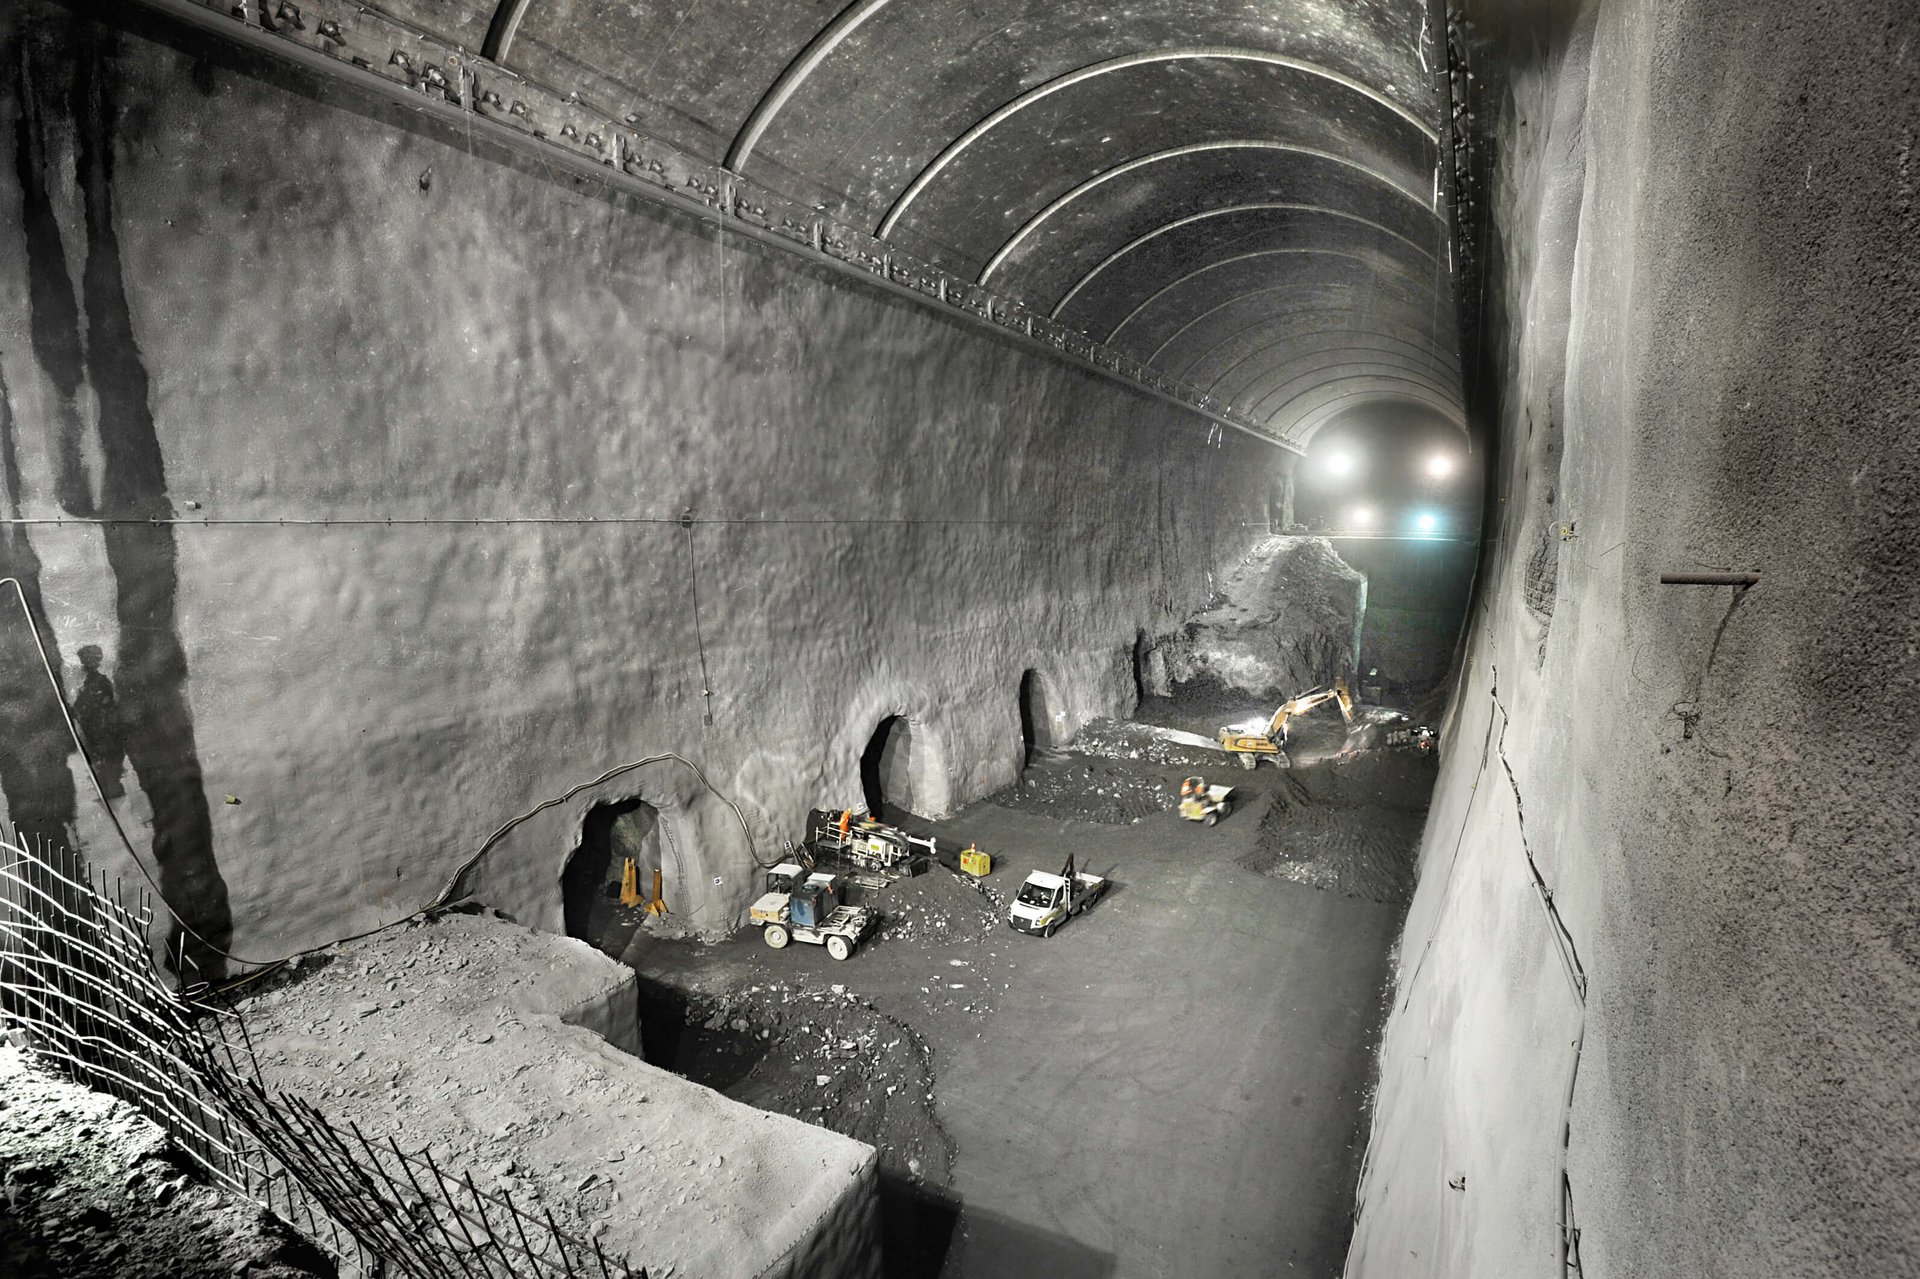 Typical scene from the construction of a power station. The tunnel is a long, dark and damp room. The walls of the tunnel are made of concrete and are illuminated. At the bottom of the tunnel are rails on which the excavator is travelling.